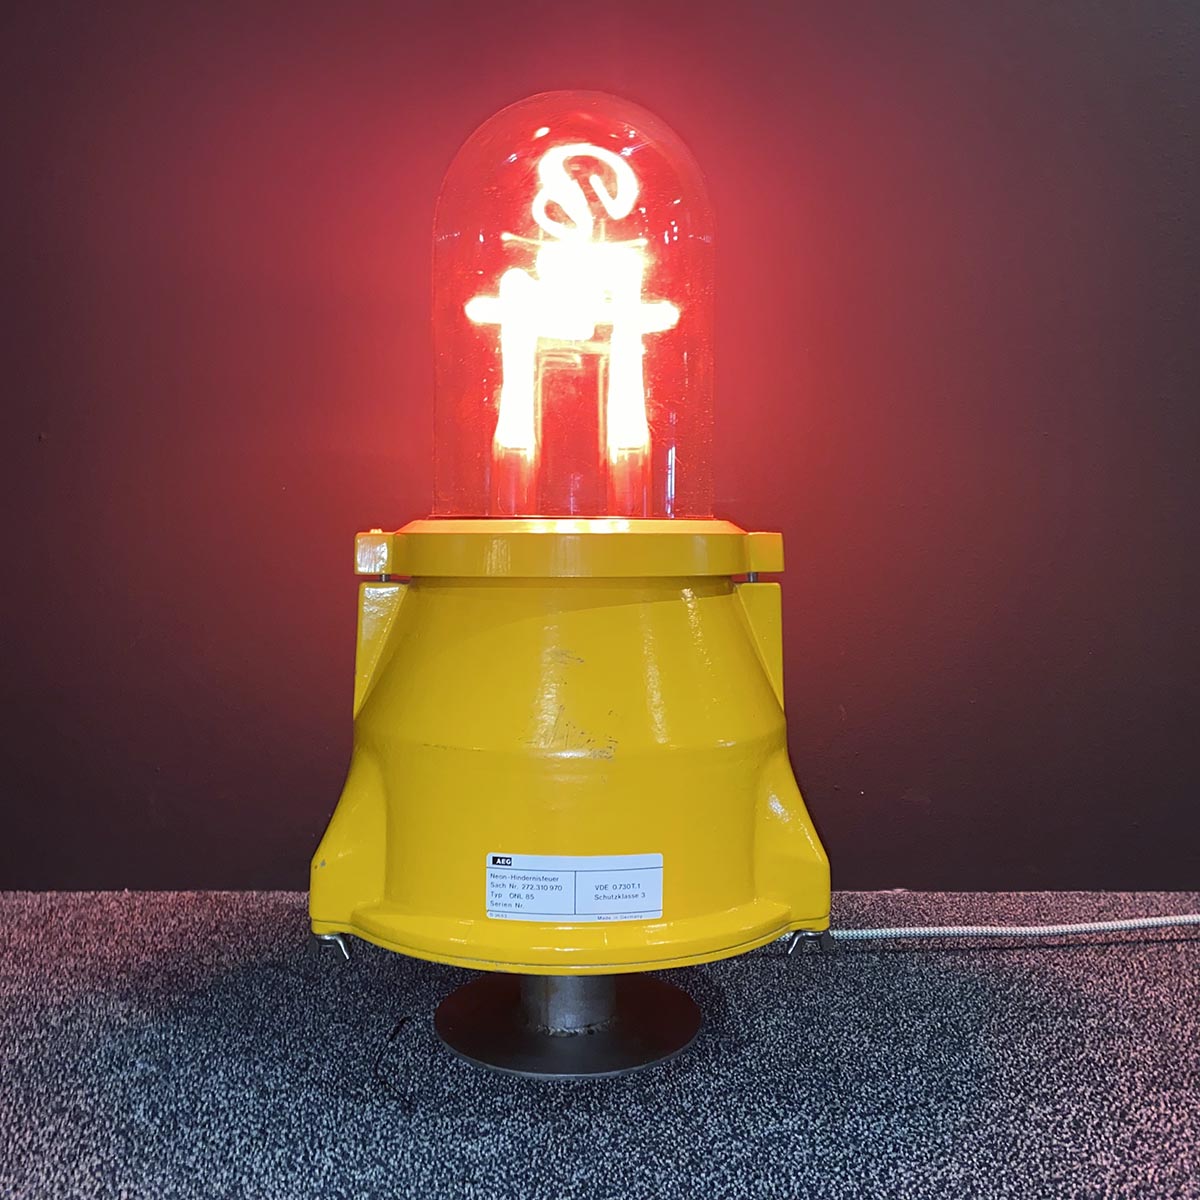 Refurbished AEG neon airport obstruction light for sale.